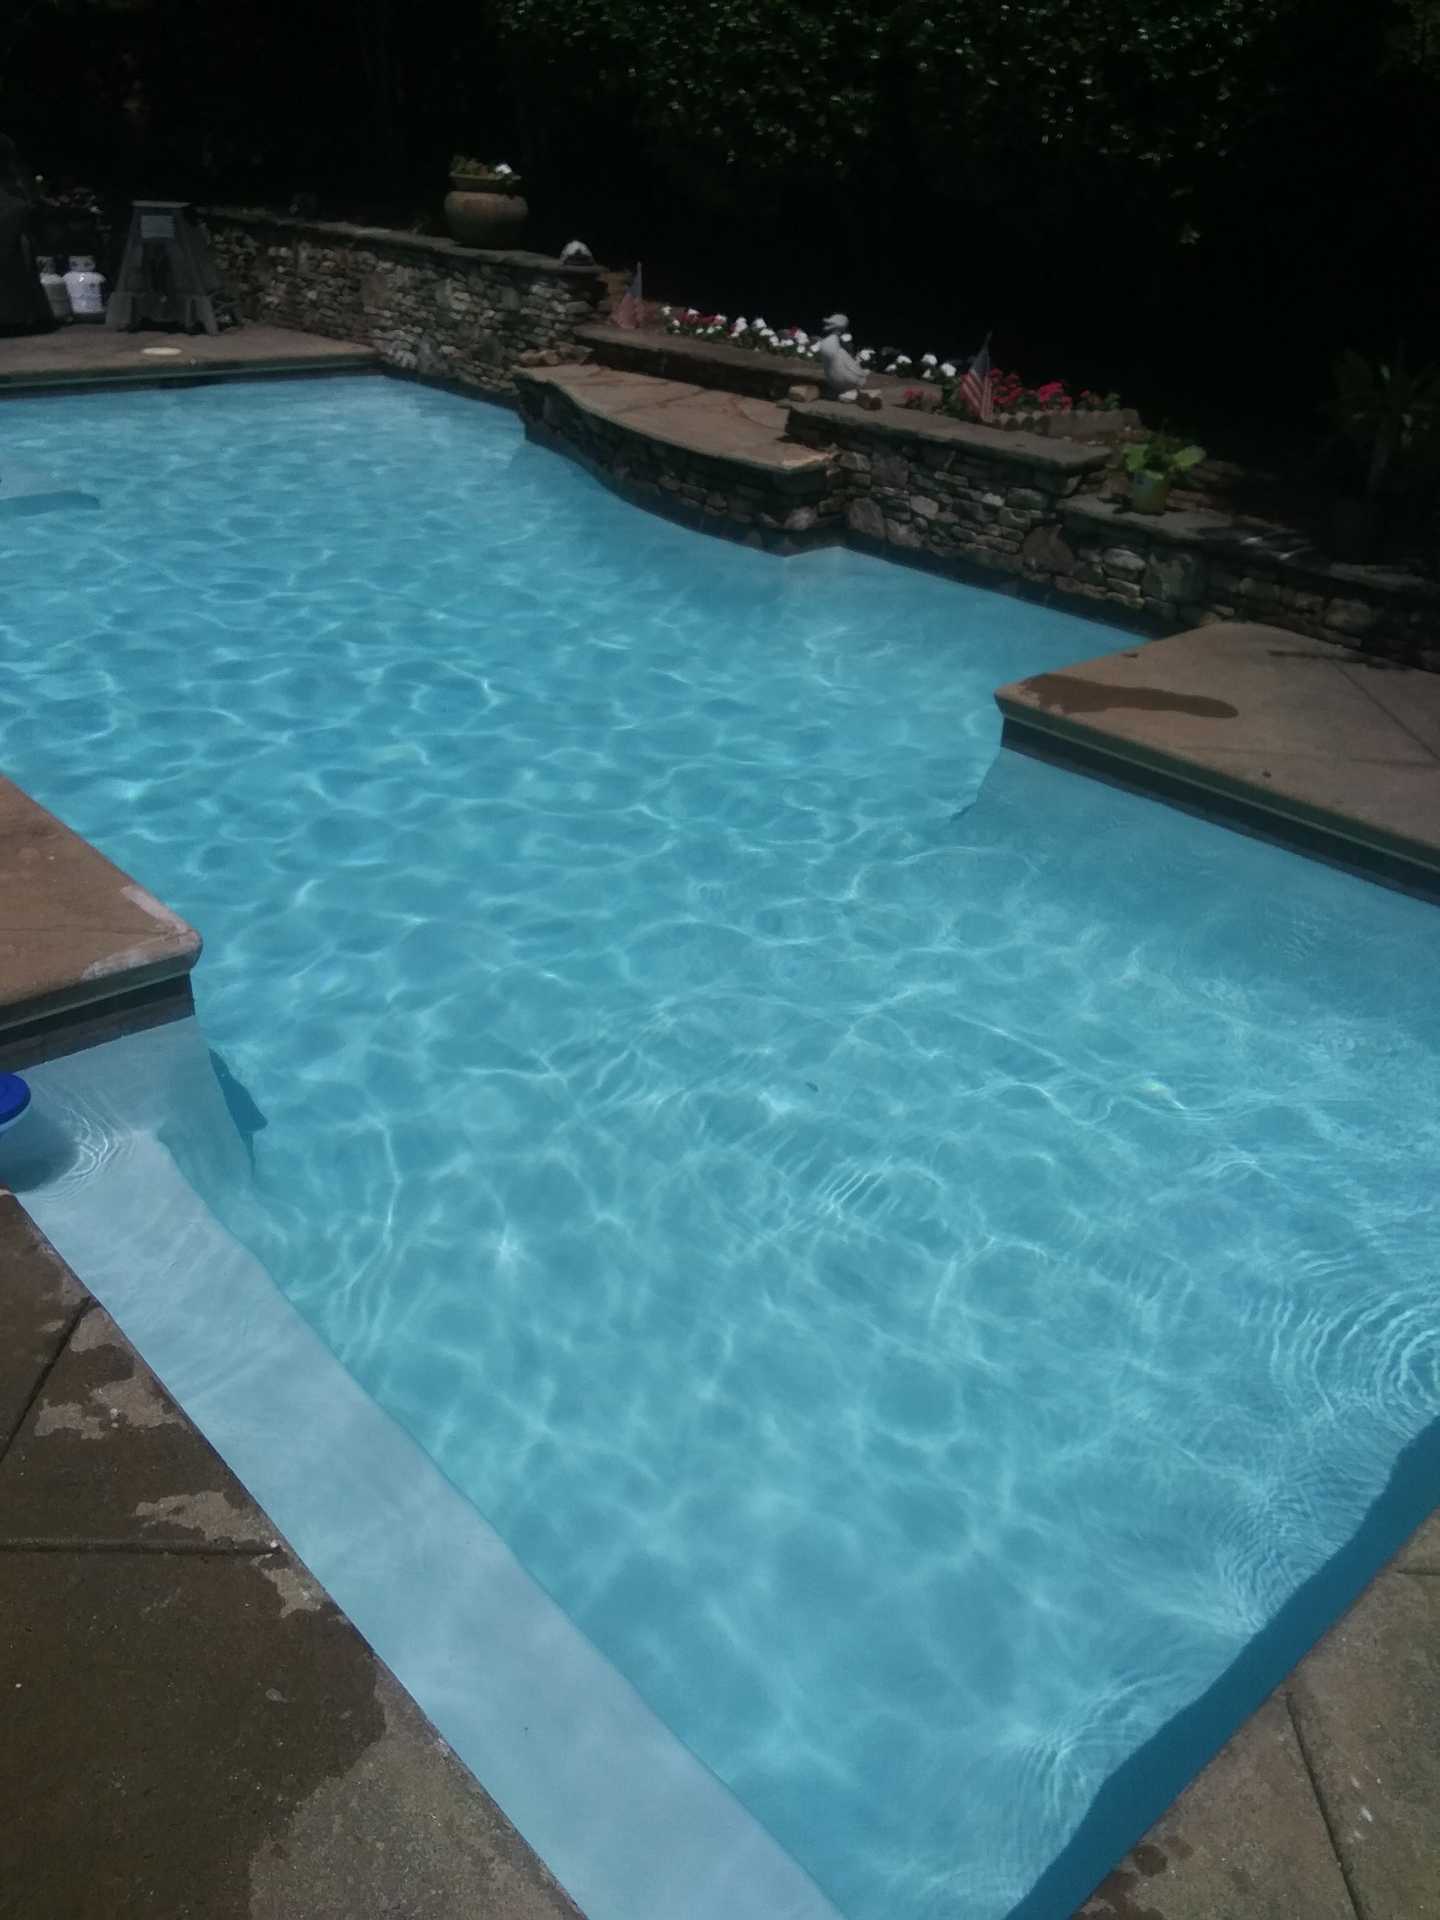 Professional Commercial Pool Service"